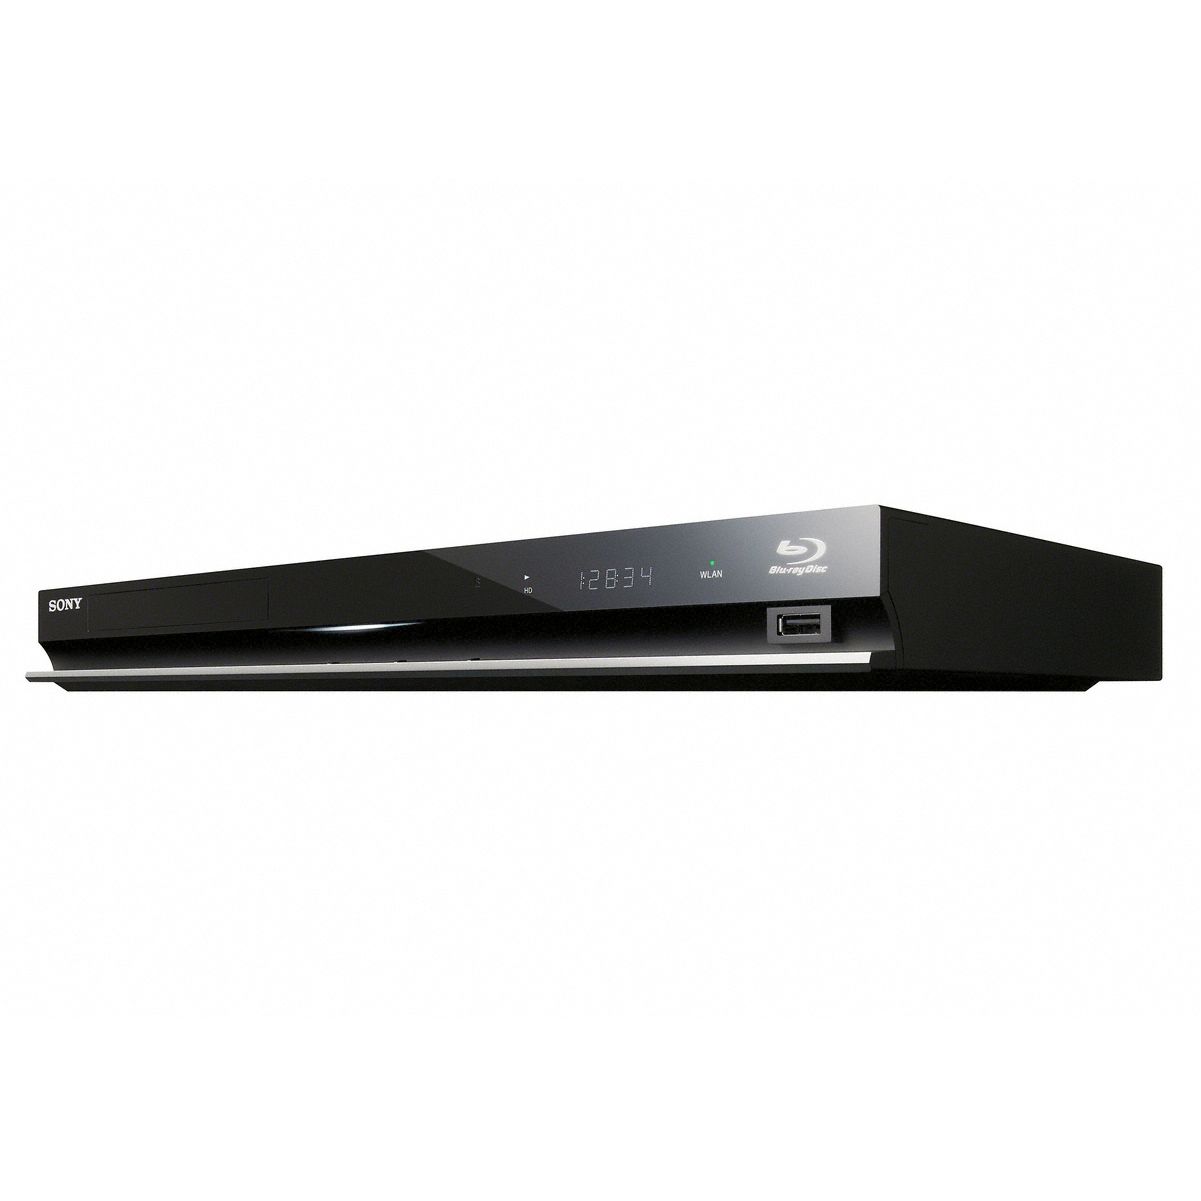 Sony BDP-S570 3D Ready Blu-ray Disc Player at John Lewis